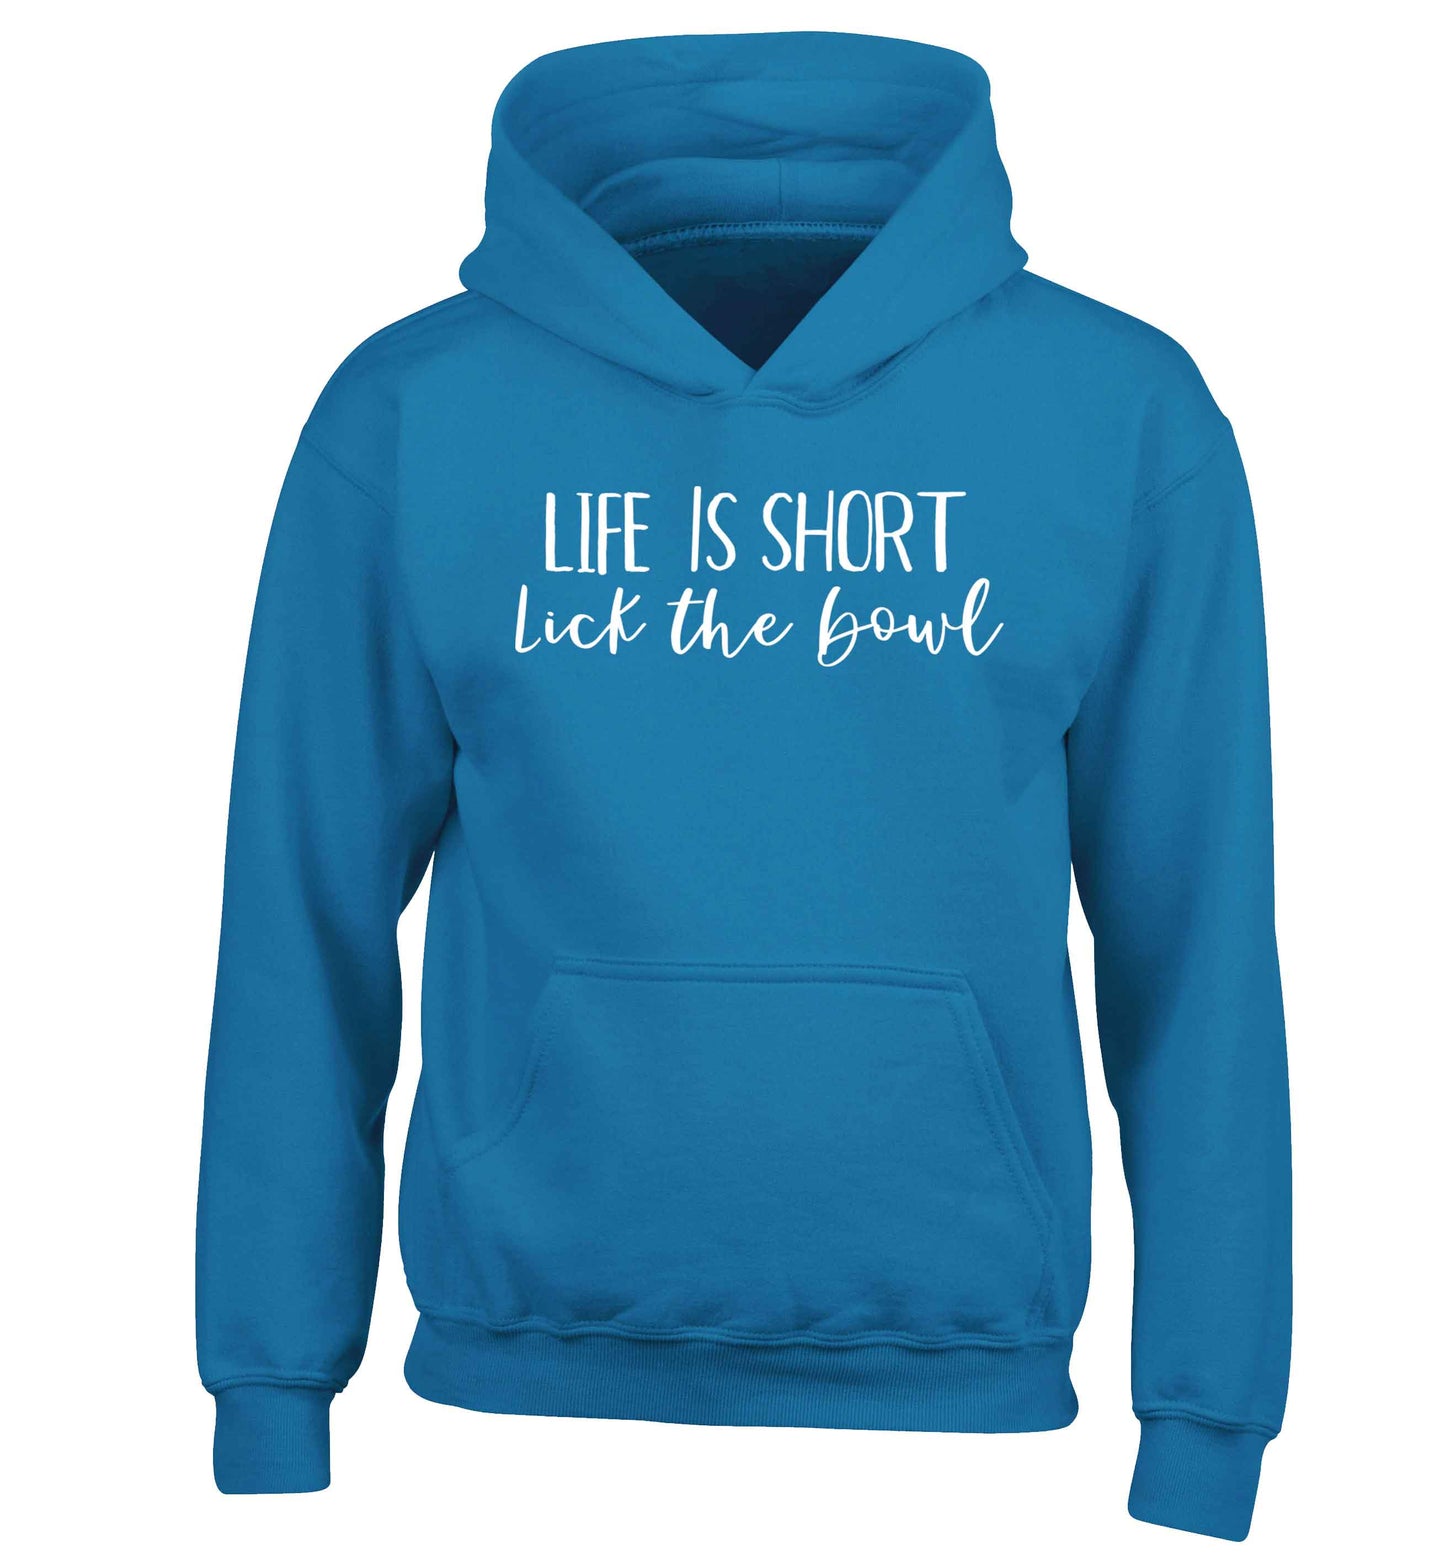 Life is short lick the bowl children's blue hoodie 12-13 Years